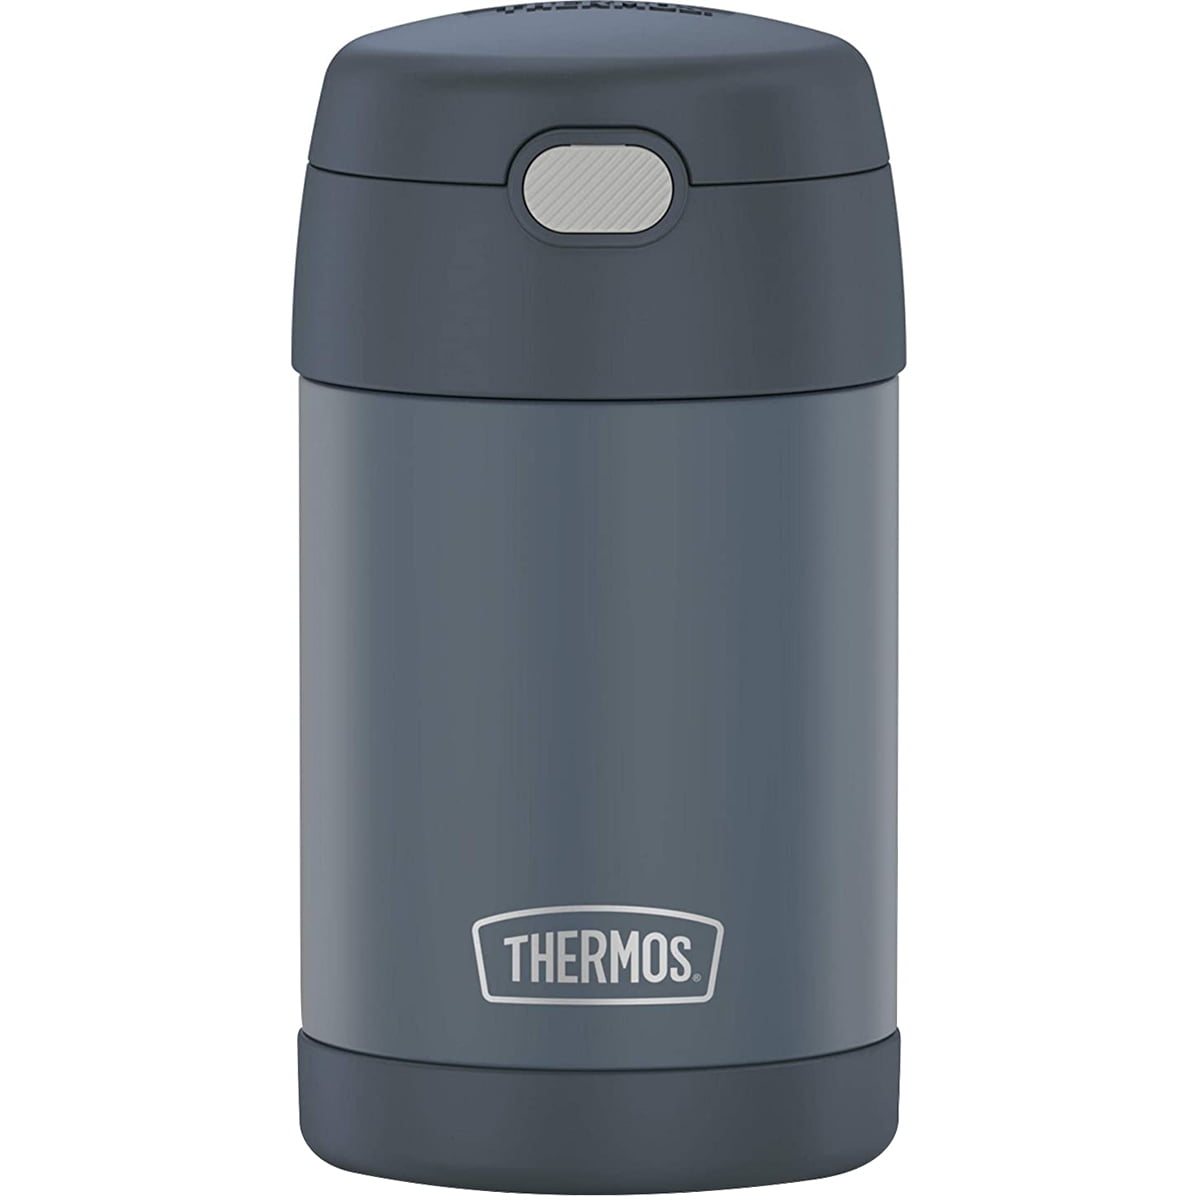 Hades Thermos 16 oz. Water Bottle